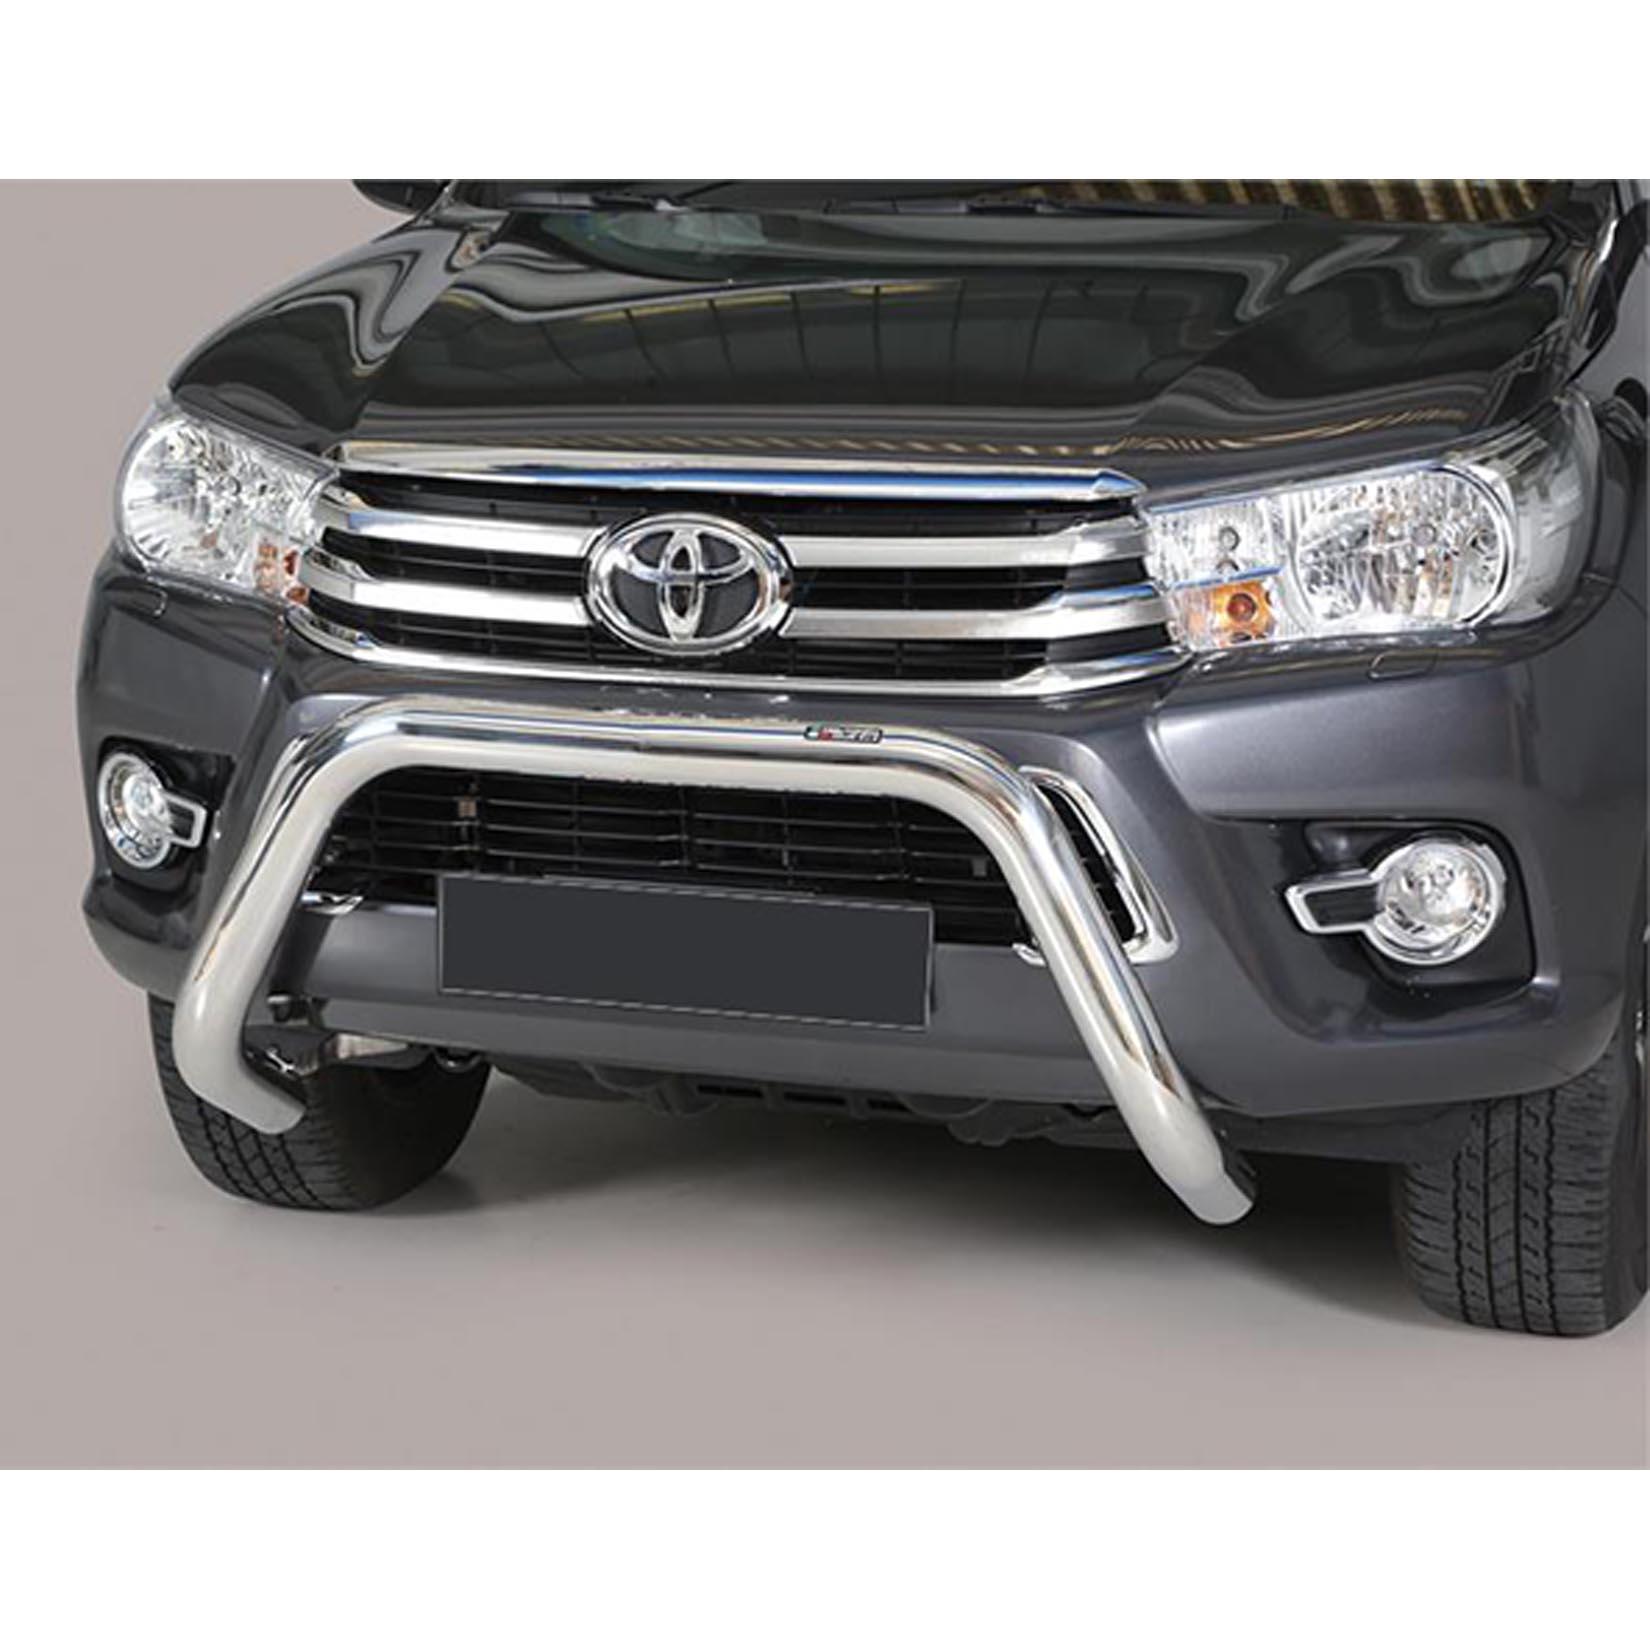 TOYOTA HILUX 2016-2020 - MISUTONIDA EU APPROVED FRONT A BAR - 76MM - STAINLESS FINISH - Storm Xccessories2